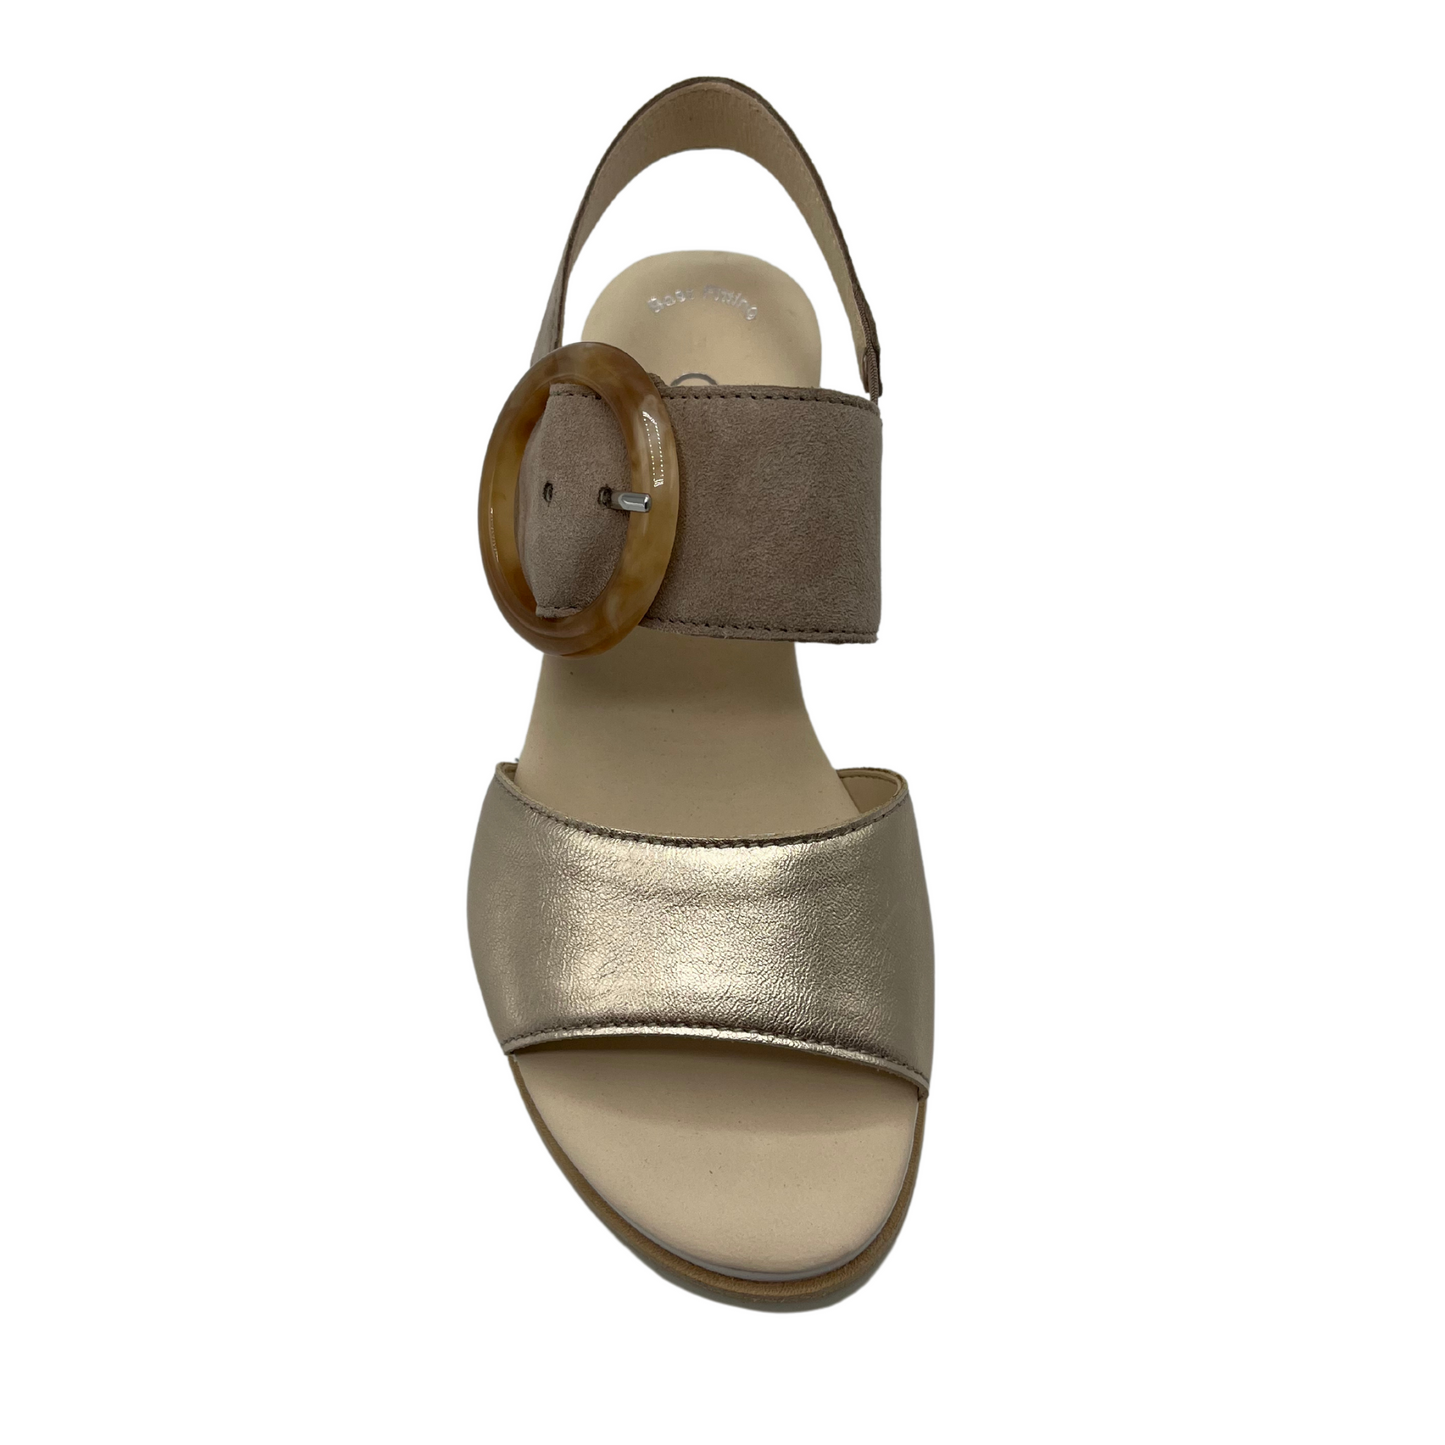 Top view of taupe suede and metallic leather sandal with open toe and sling back strap